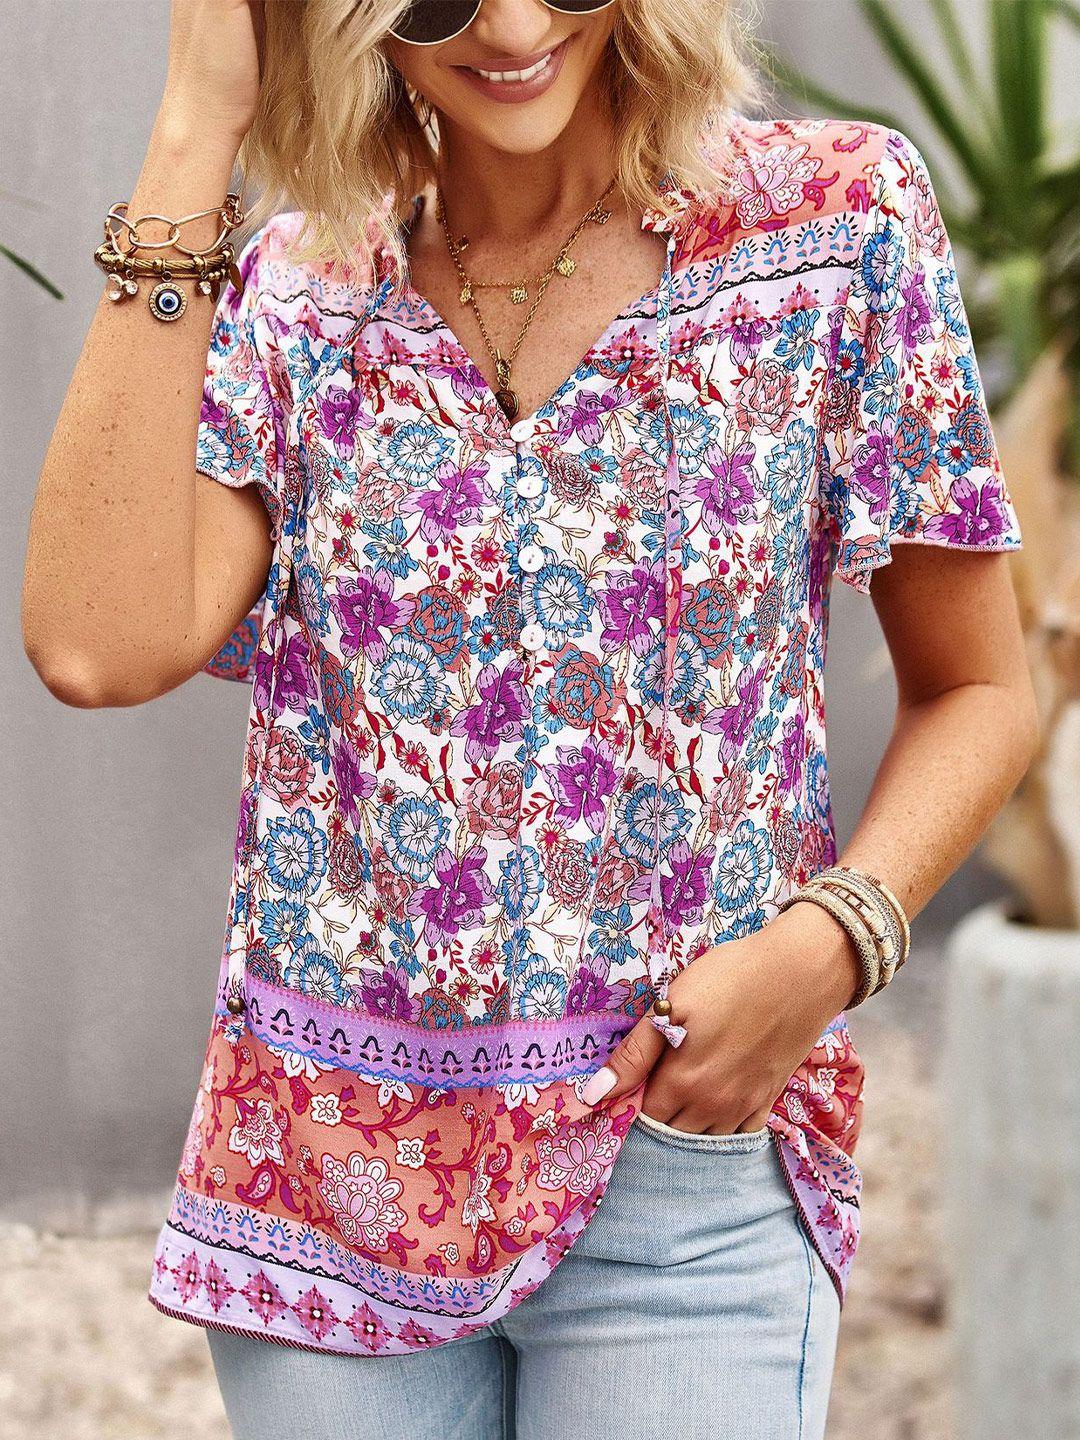 stylecast-floral-print-tie-up-neck-flared-sleeve-top